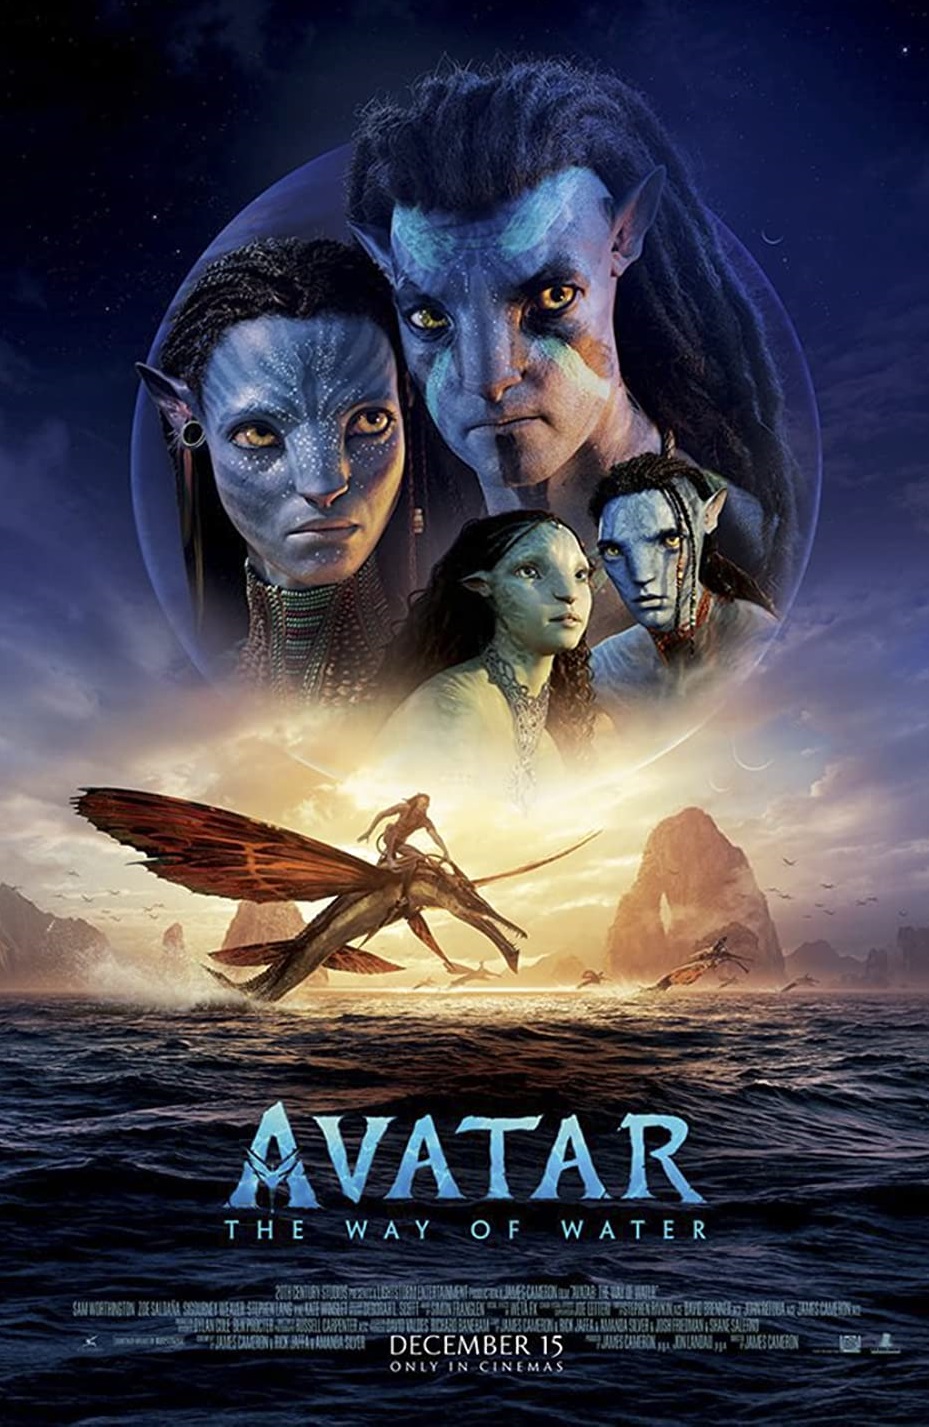 Avatar: The Way of Water 2022 Tamil Dubbed Action Movie Online